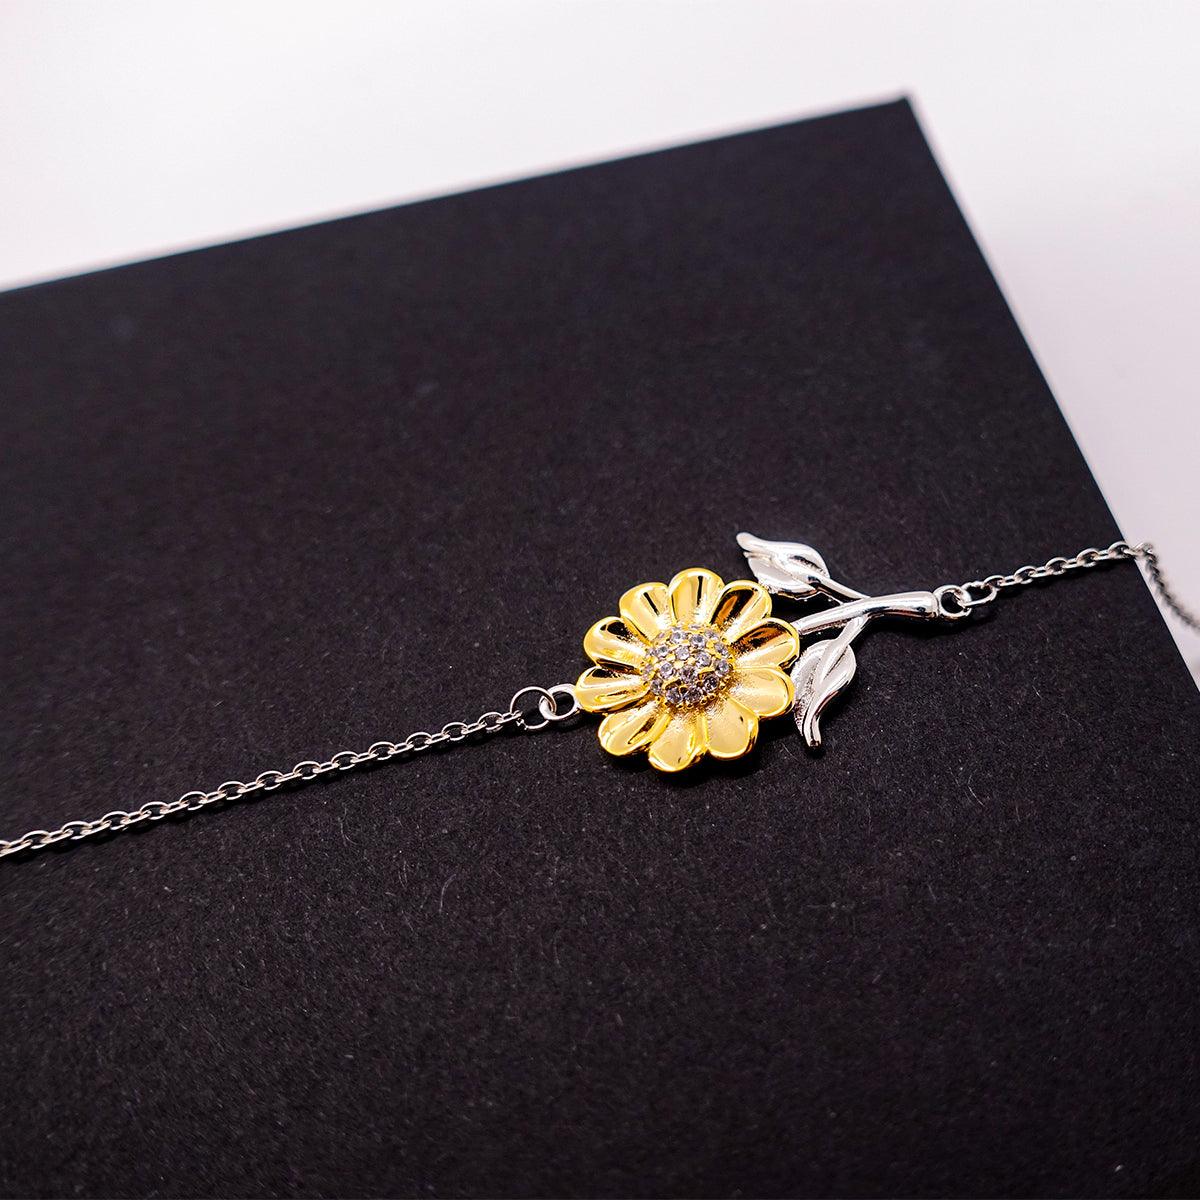 Remarkable Mail Carrier Gifts, Your dedication and hard work, Inspirational Birthday Christmas Unique Sunflower Bracelet For Mail Carrier, Coworkers, Men, Women, Friends - Mallard Moon Gift Shop